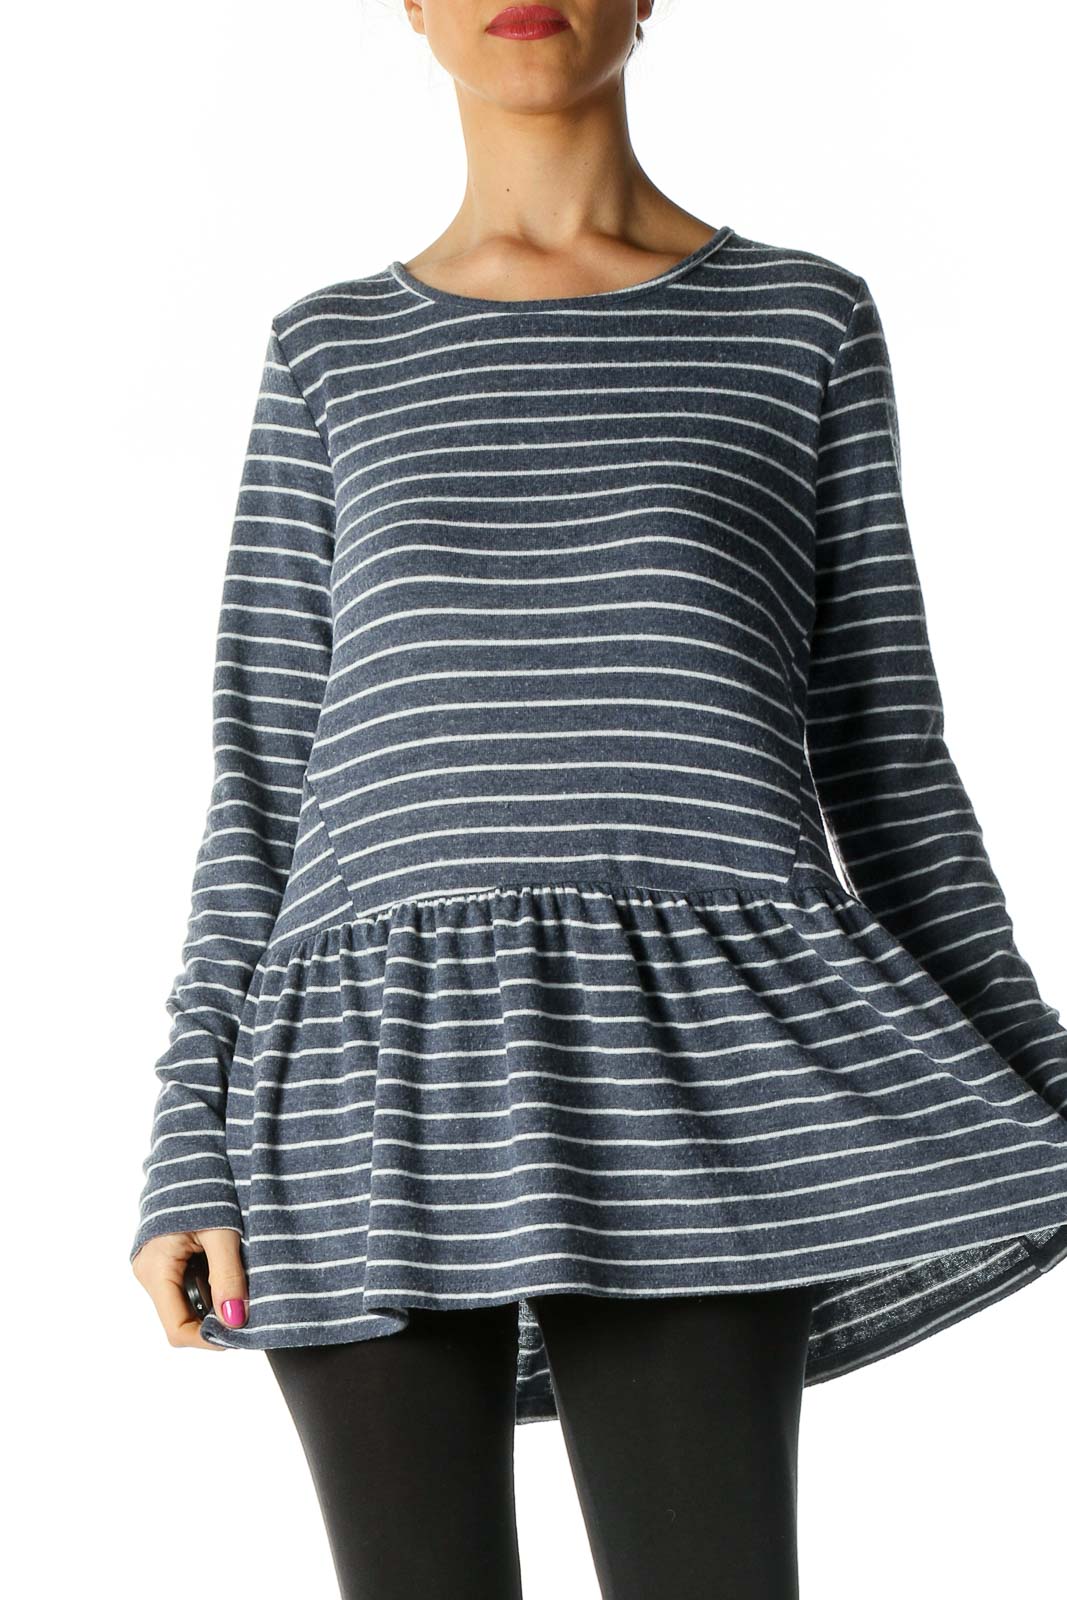 Gray Striped Casual T-Shirt Front